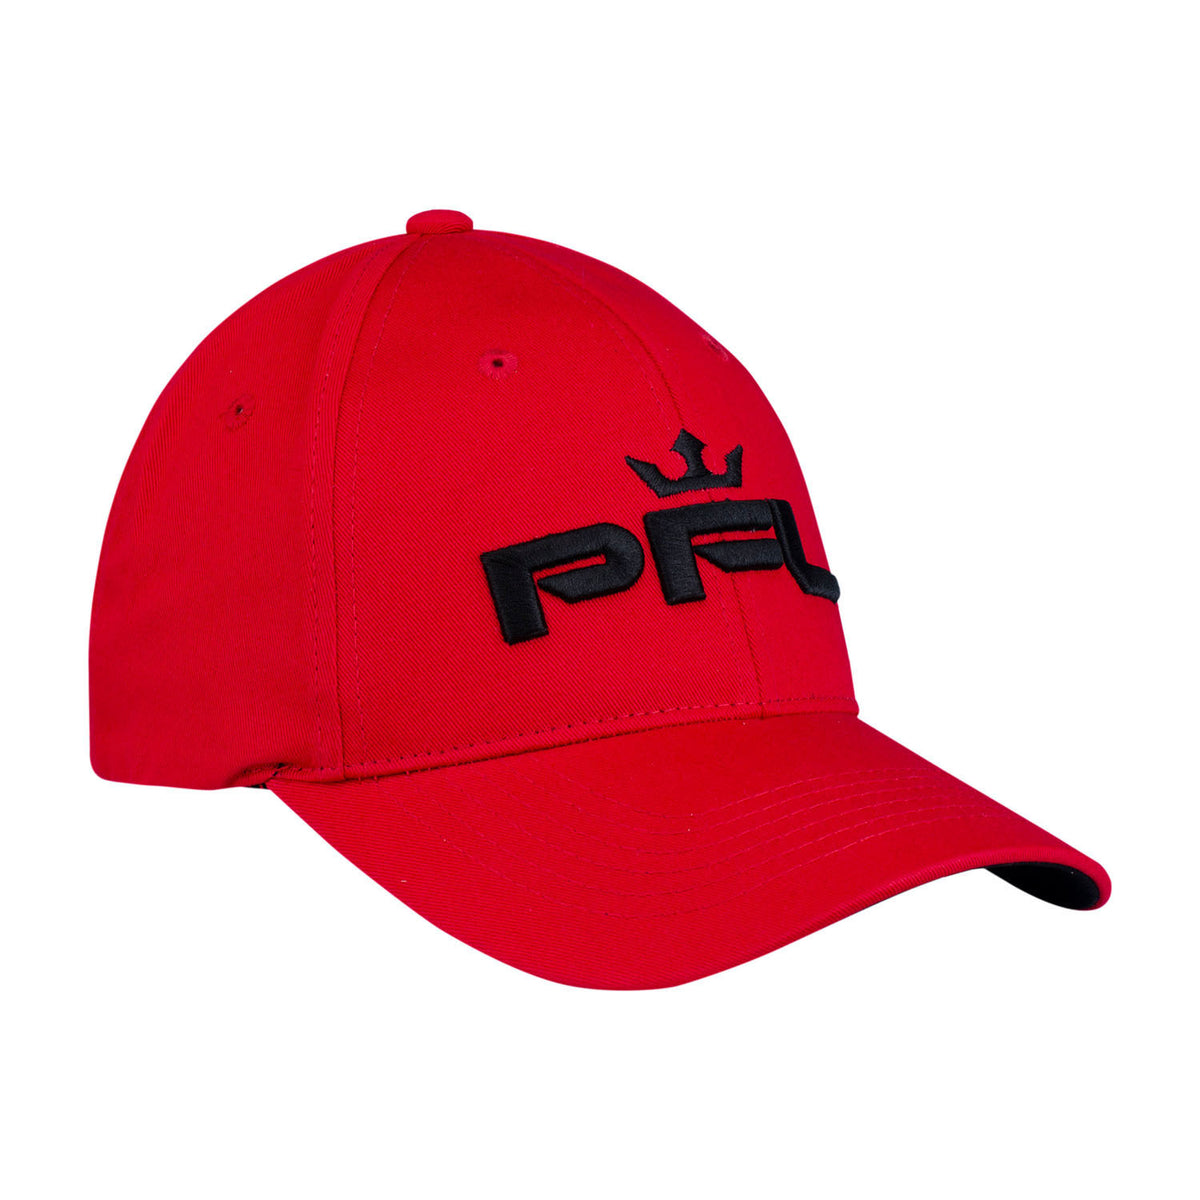 PFL Walkout Hat in Red - Right Side View